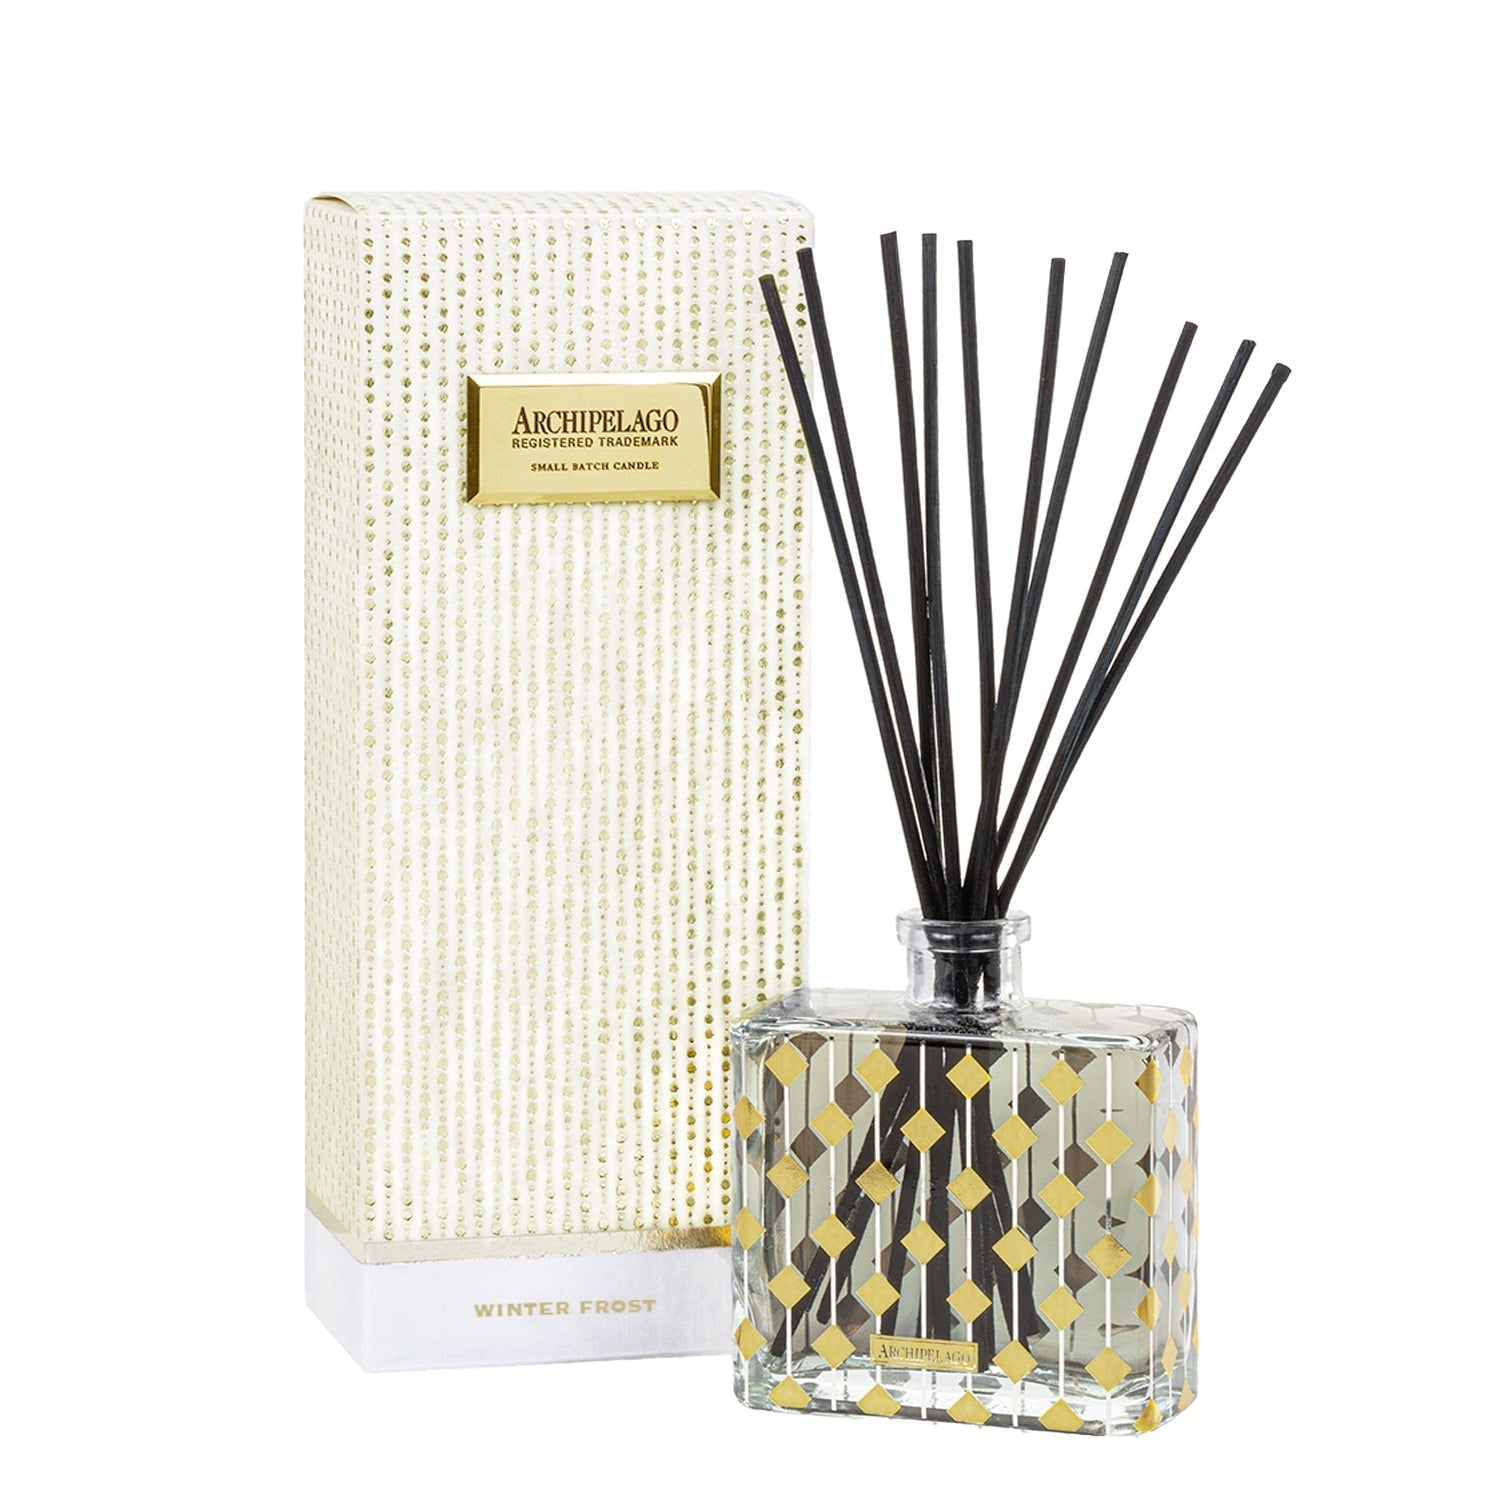 Winter Frost Holiday Diffuser